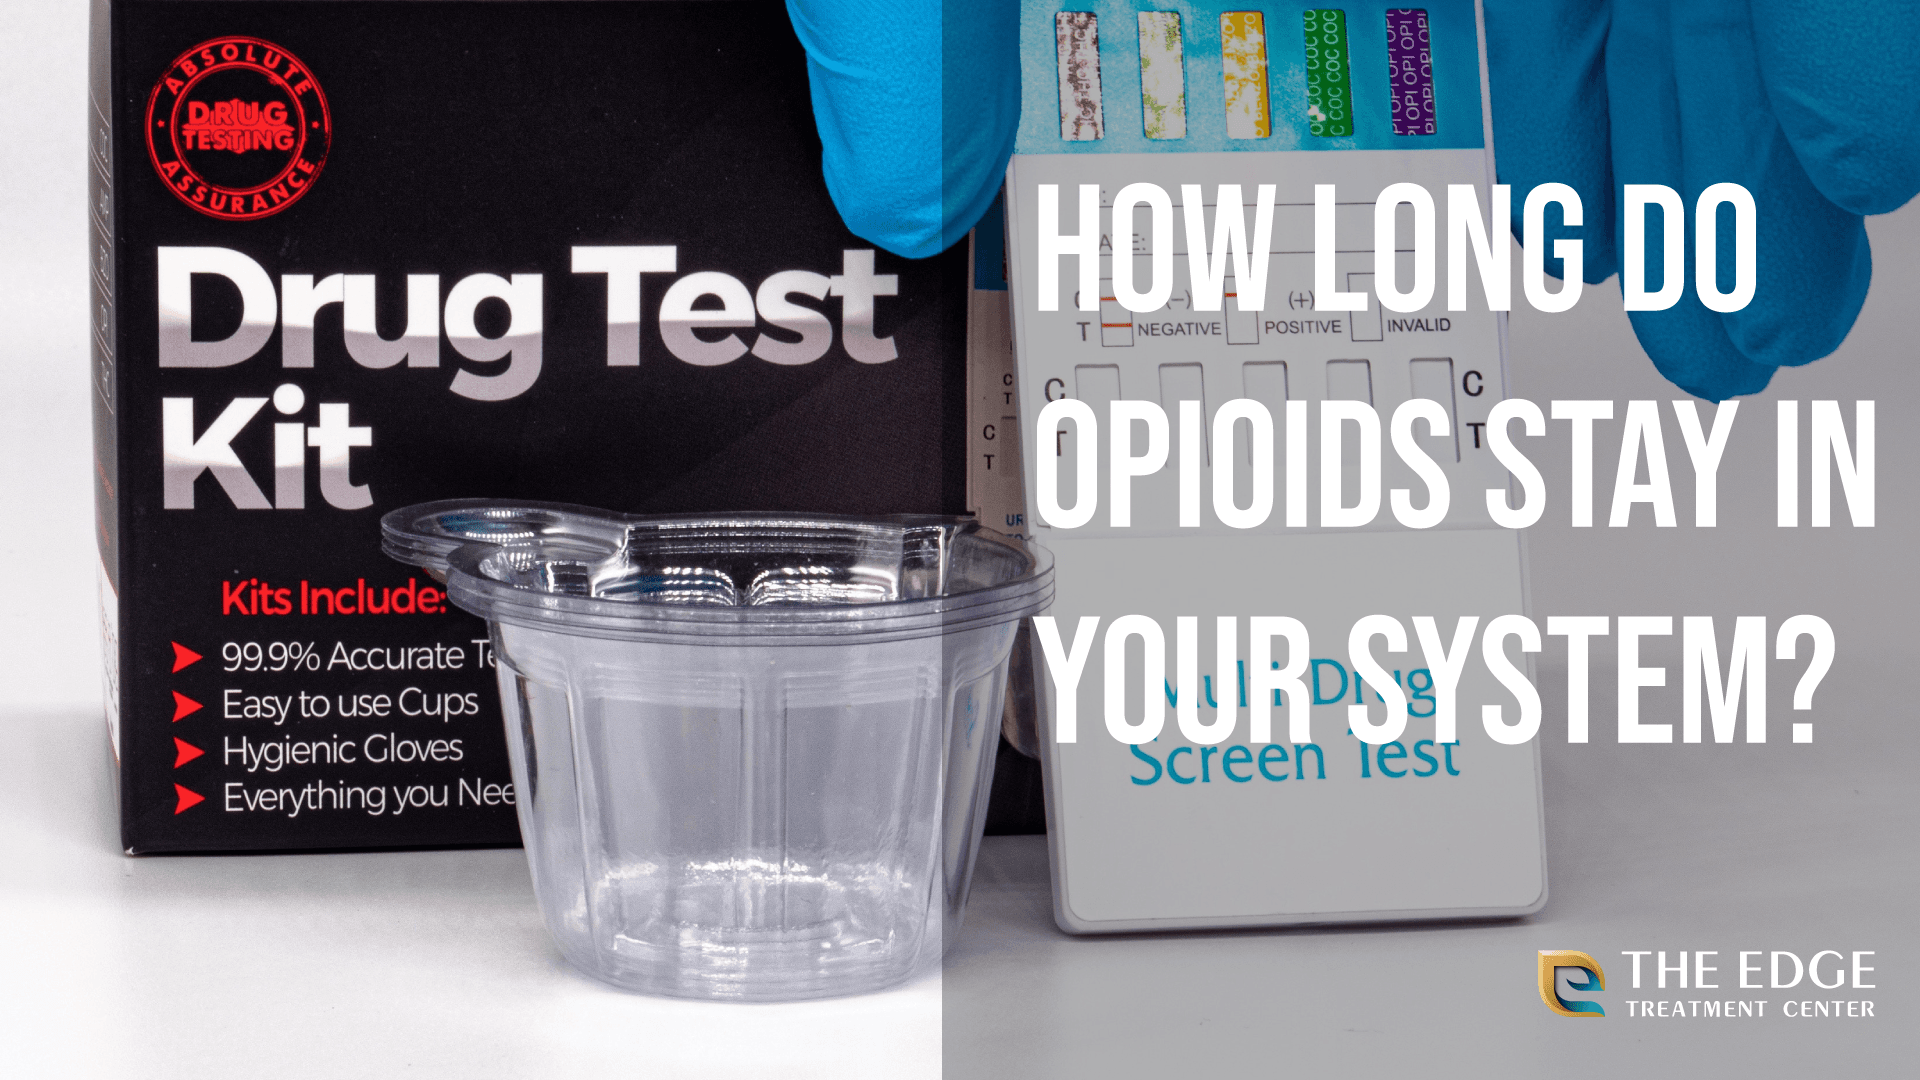 How Long Do Opioids Stay in Your System?